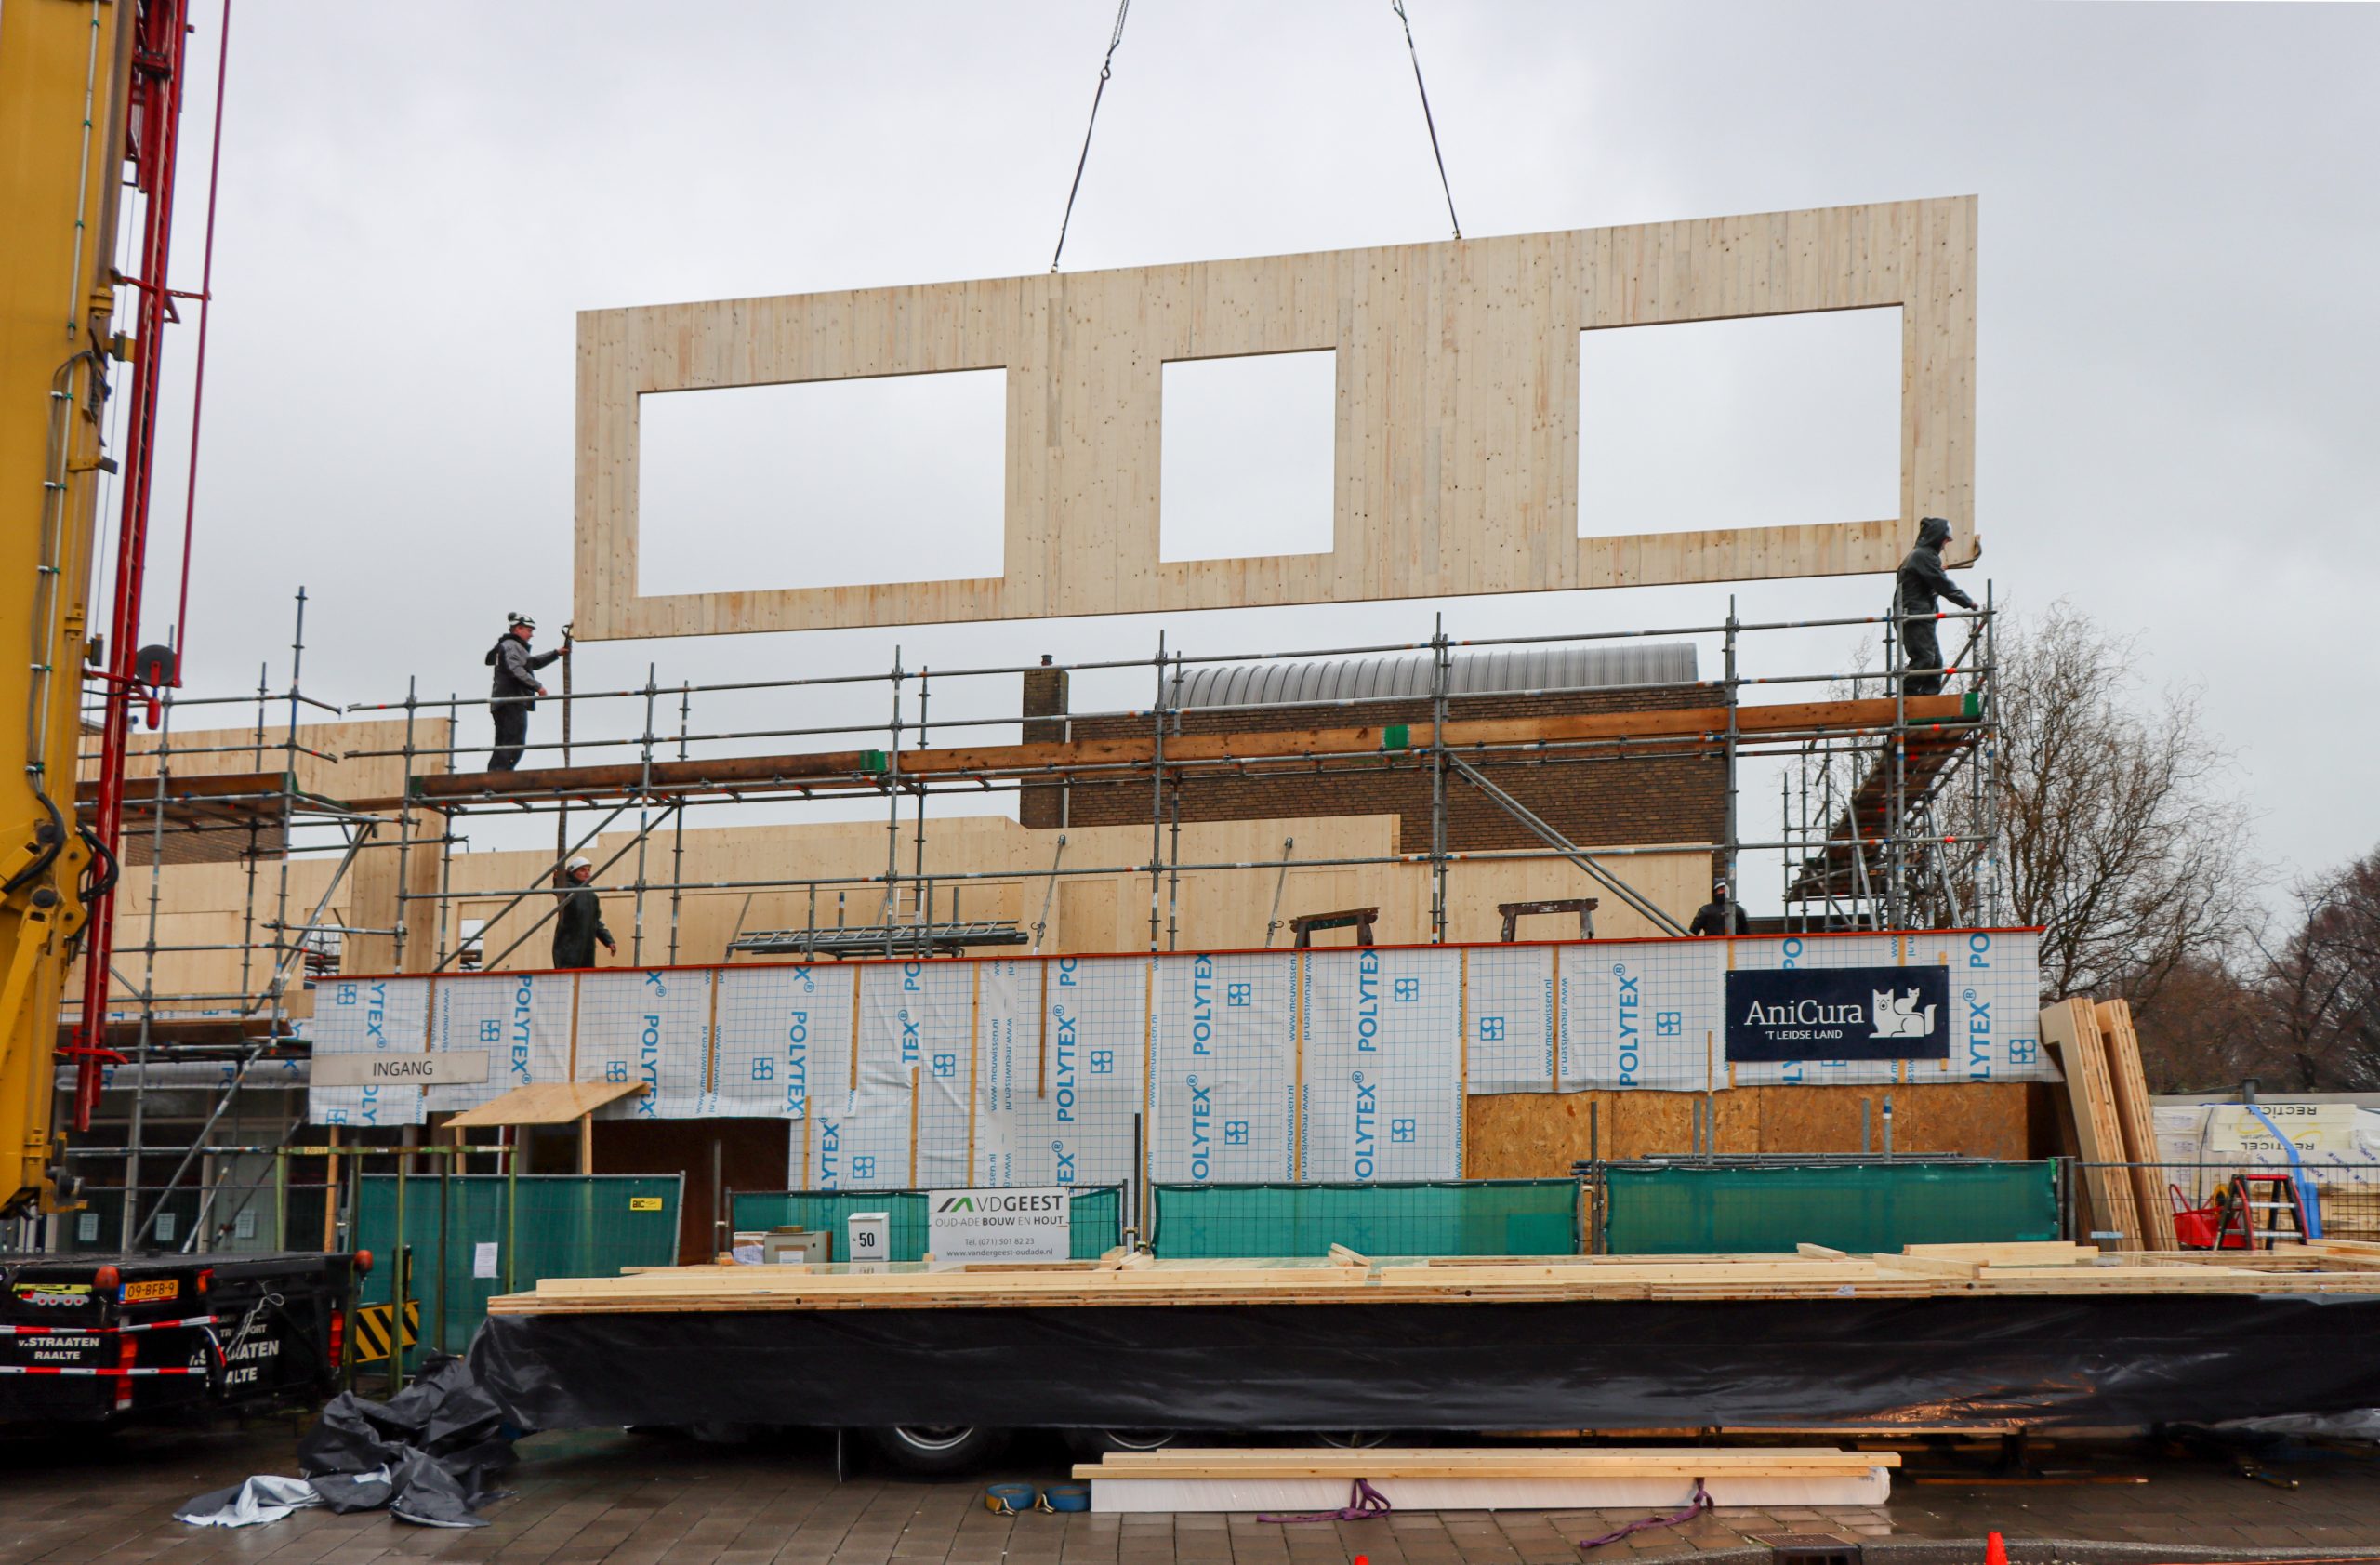 CLT prefab elements arrived and mounted on site Anicura 't Leidse Land